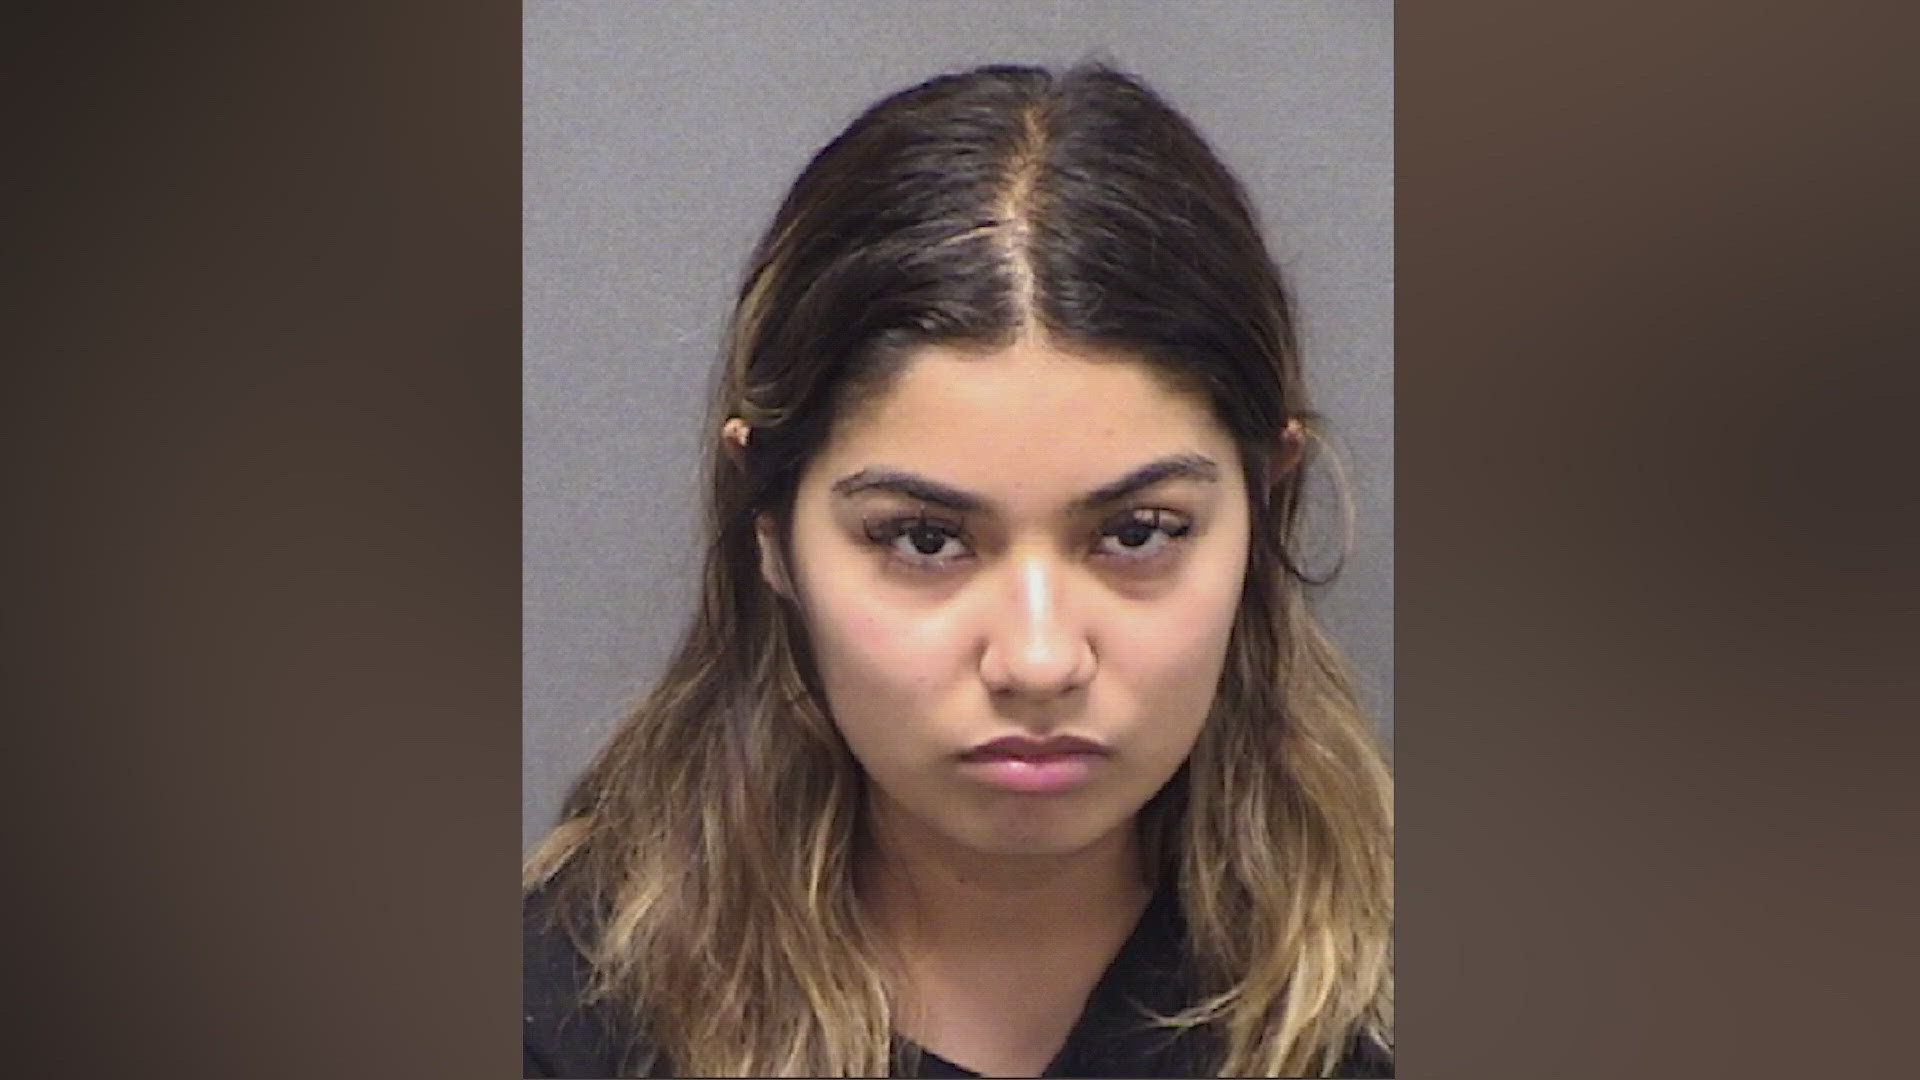 An arrest affidavit showed Maria Martinez, 20, is facing a charge of making terroristic threats.